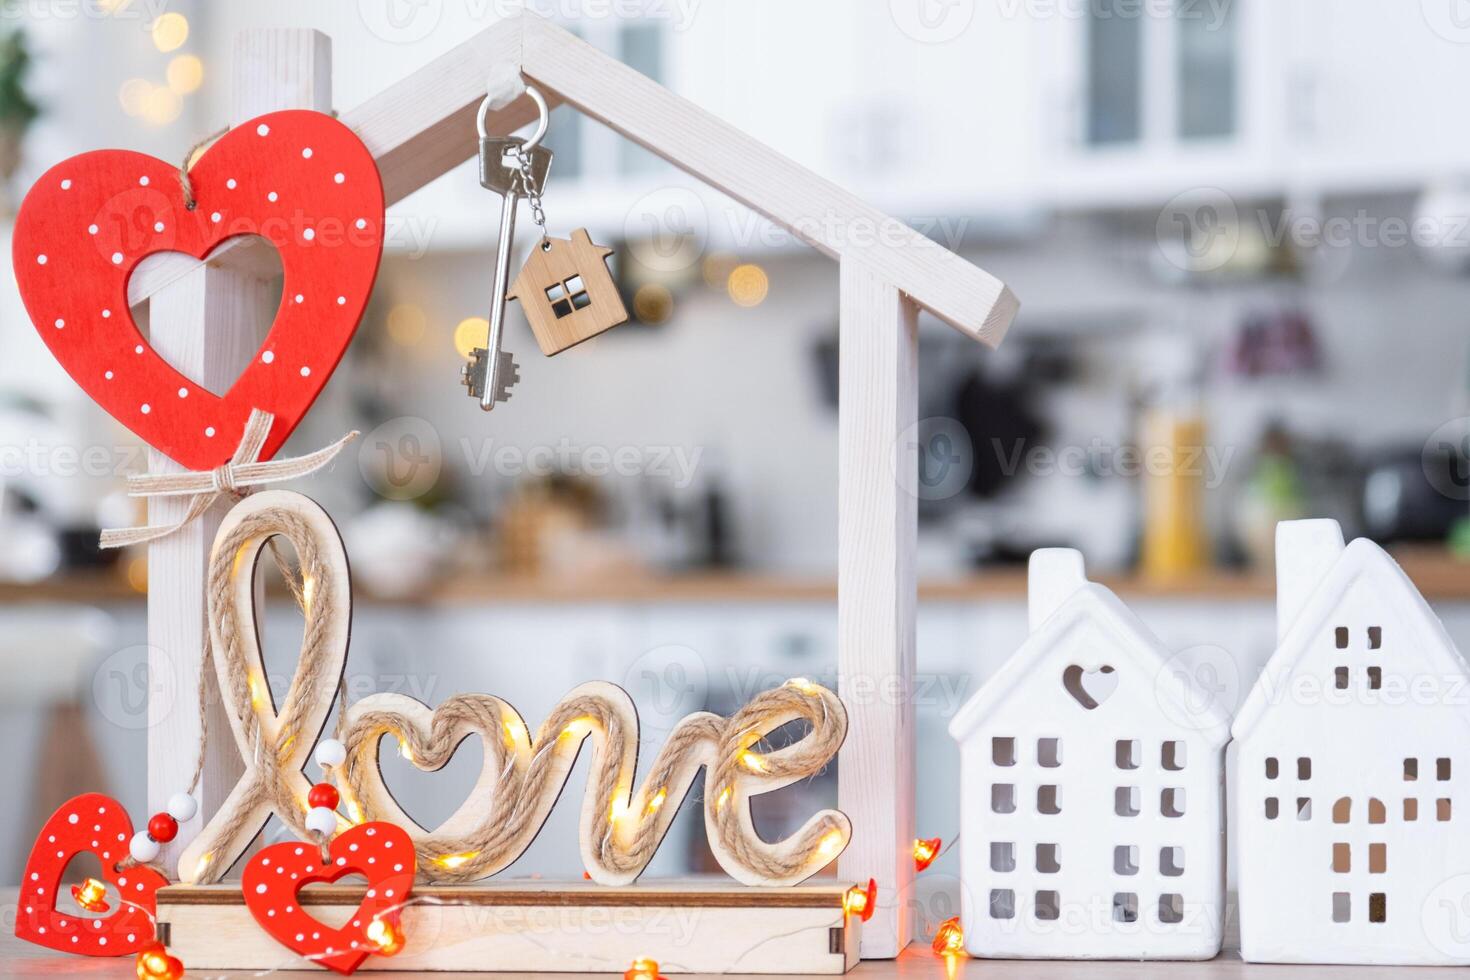 Key to tiny house of cozy home with Valentine decor on table of kitchen. Gift for valentines day, family love nest. design, project, moving to new house, mortgage, rent and purchase real estate photo